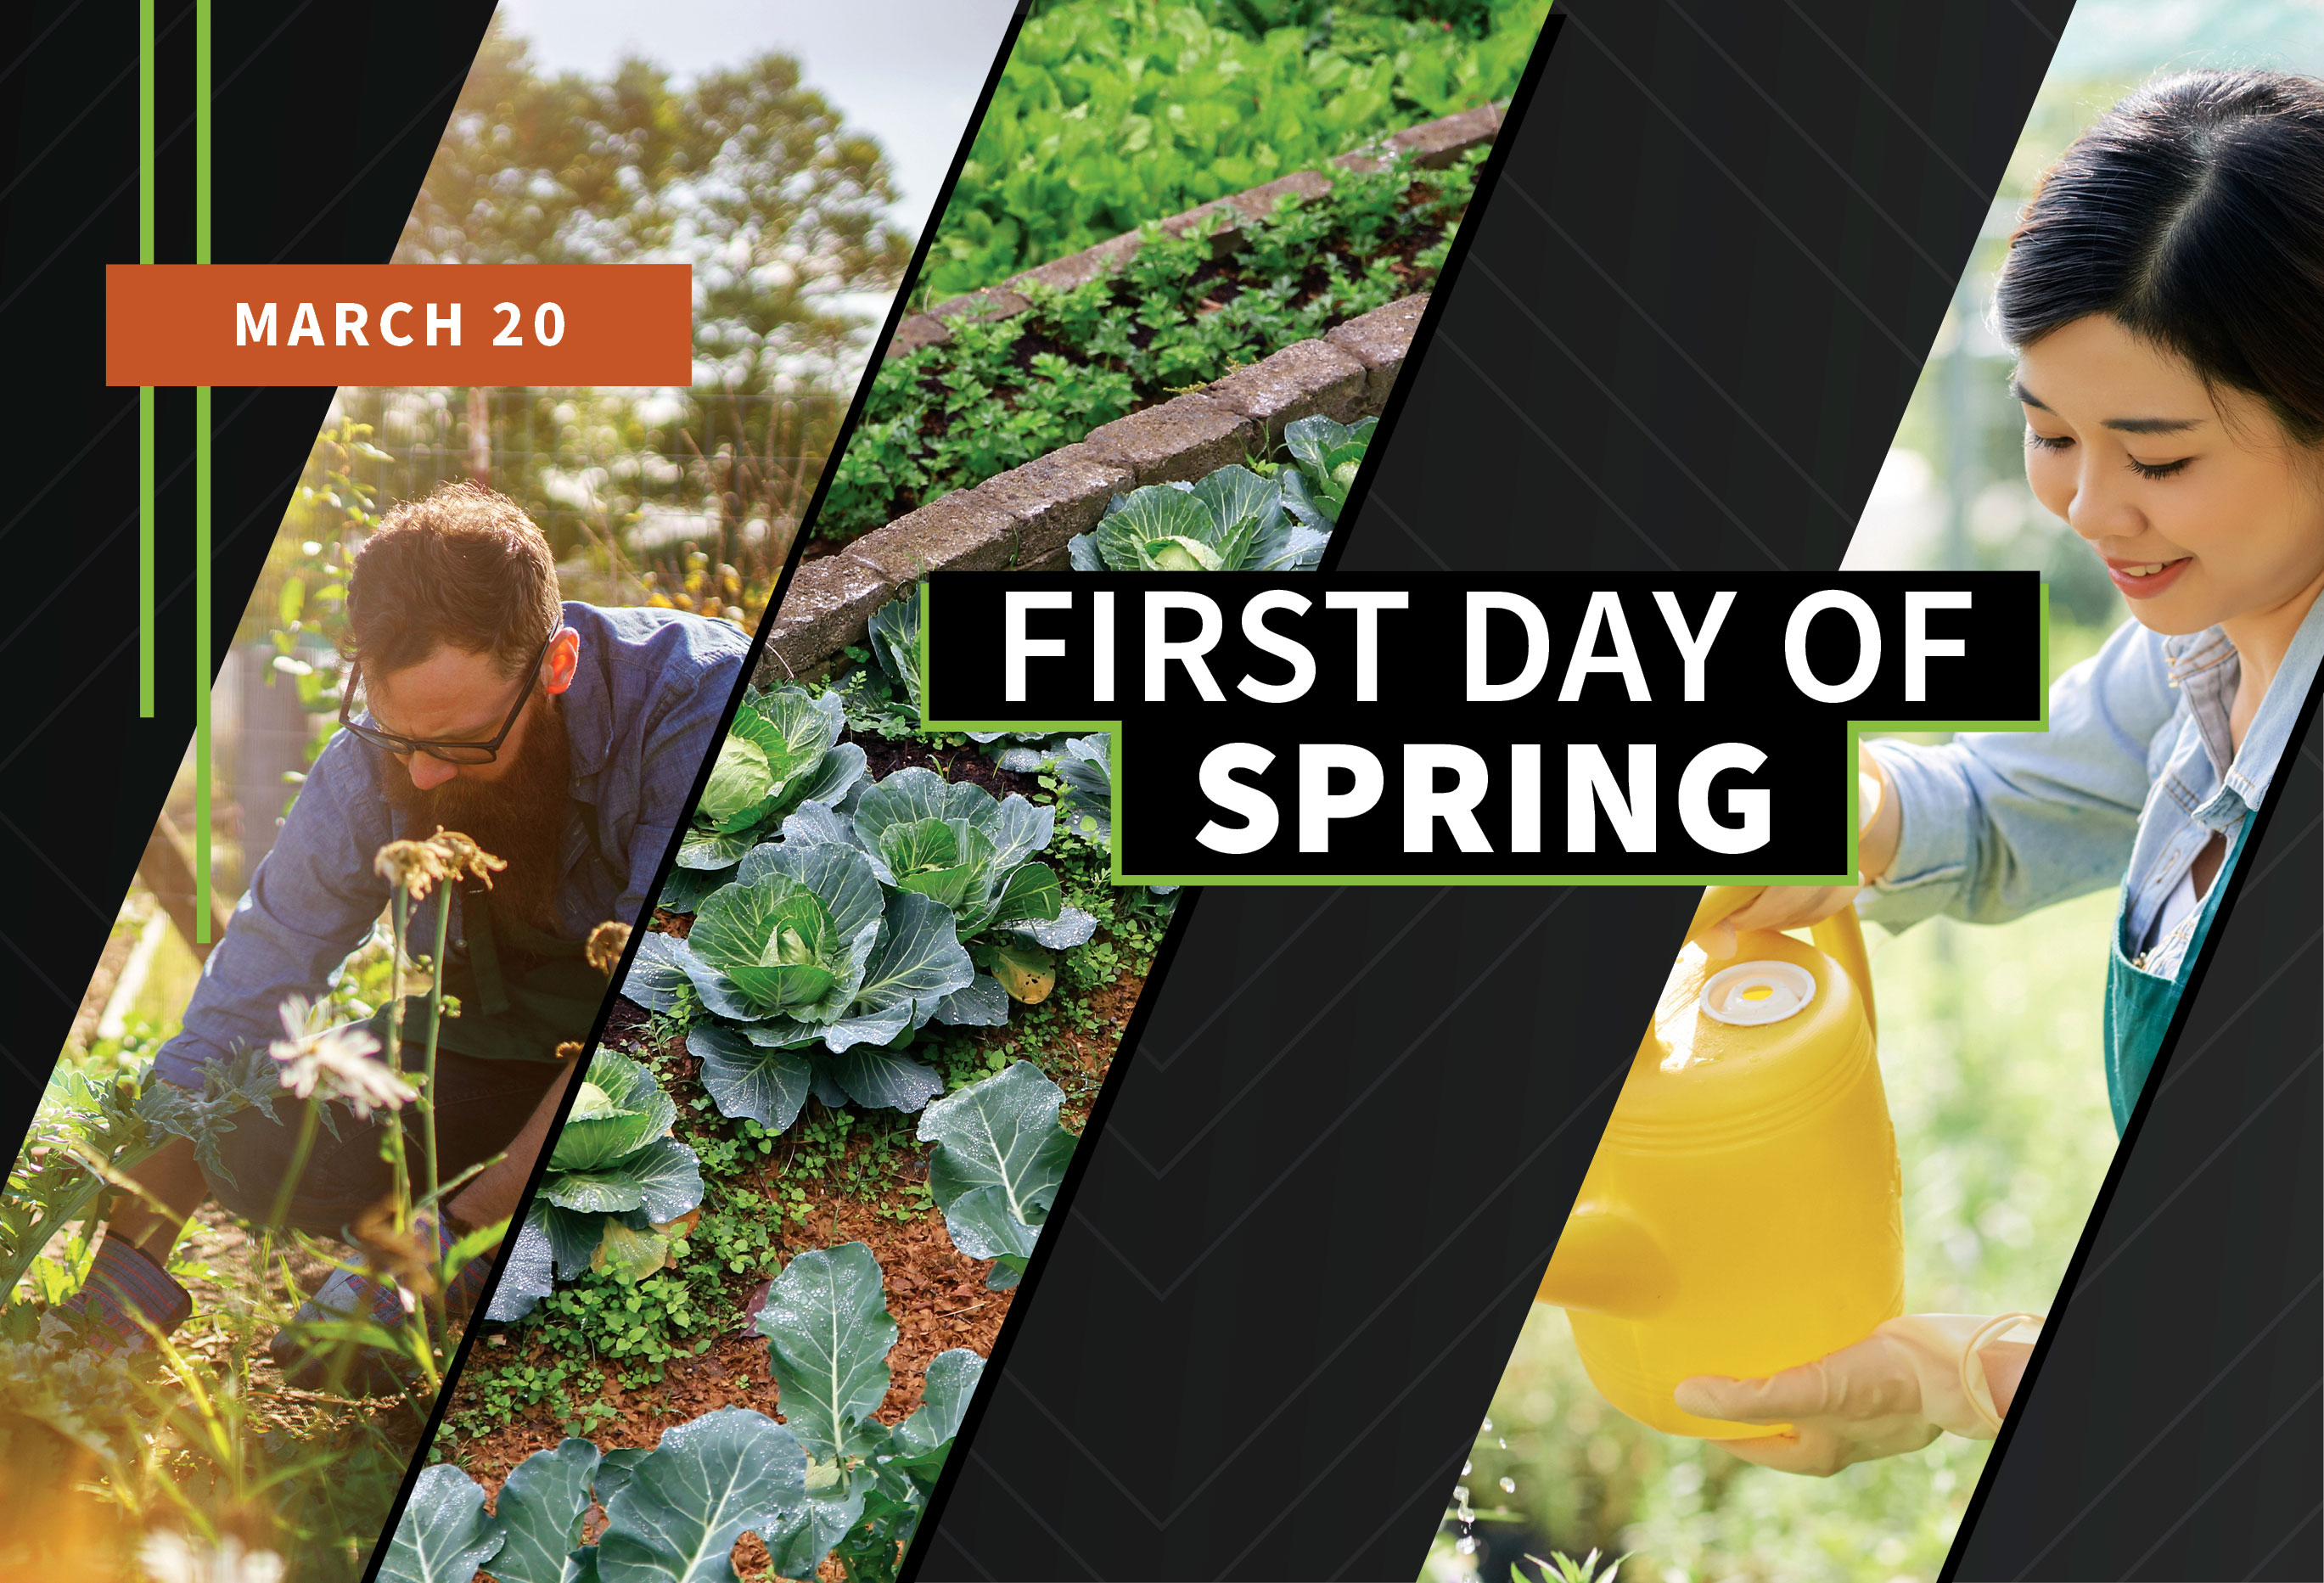 First Day of Spring. Images courtesy of AdobeStock